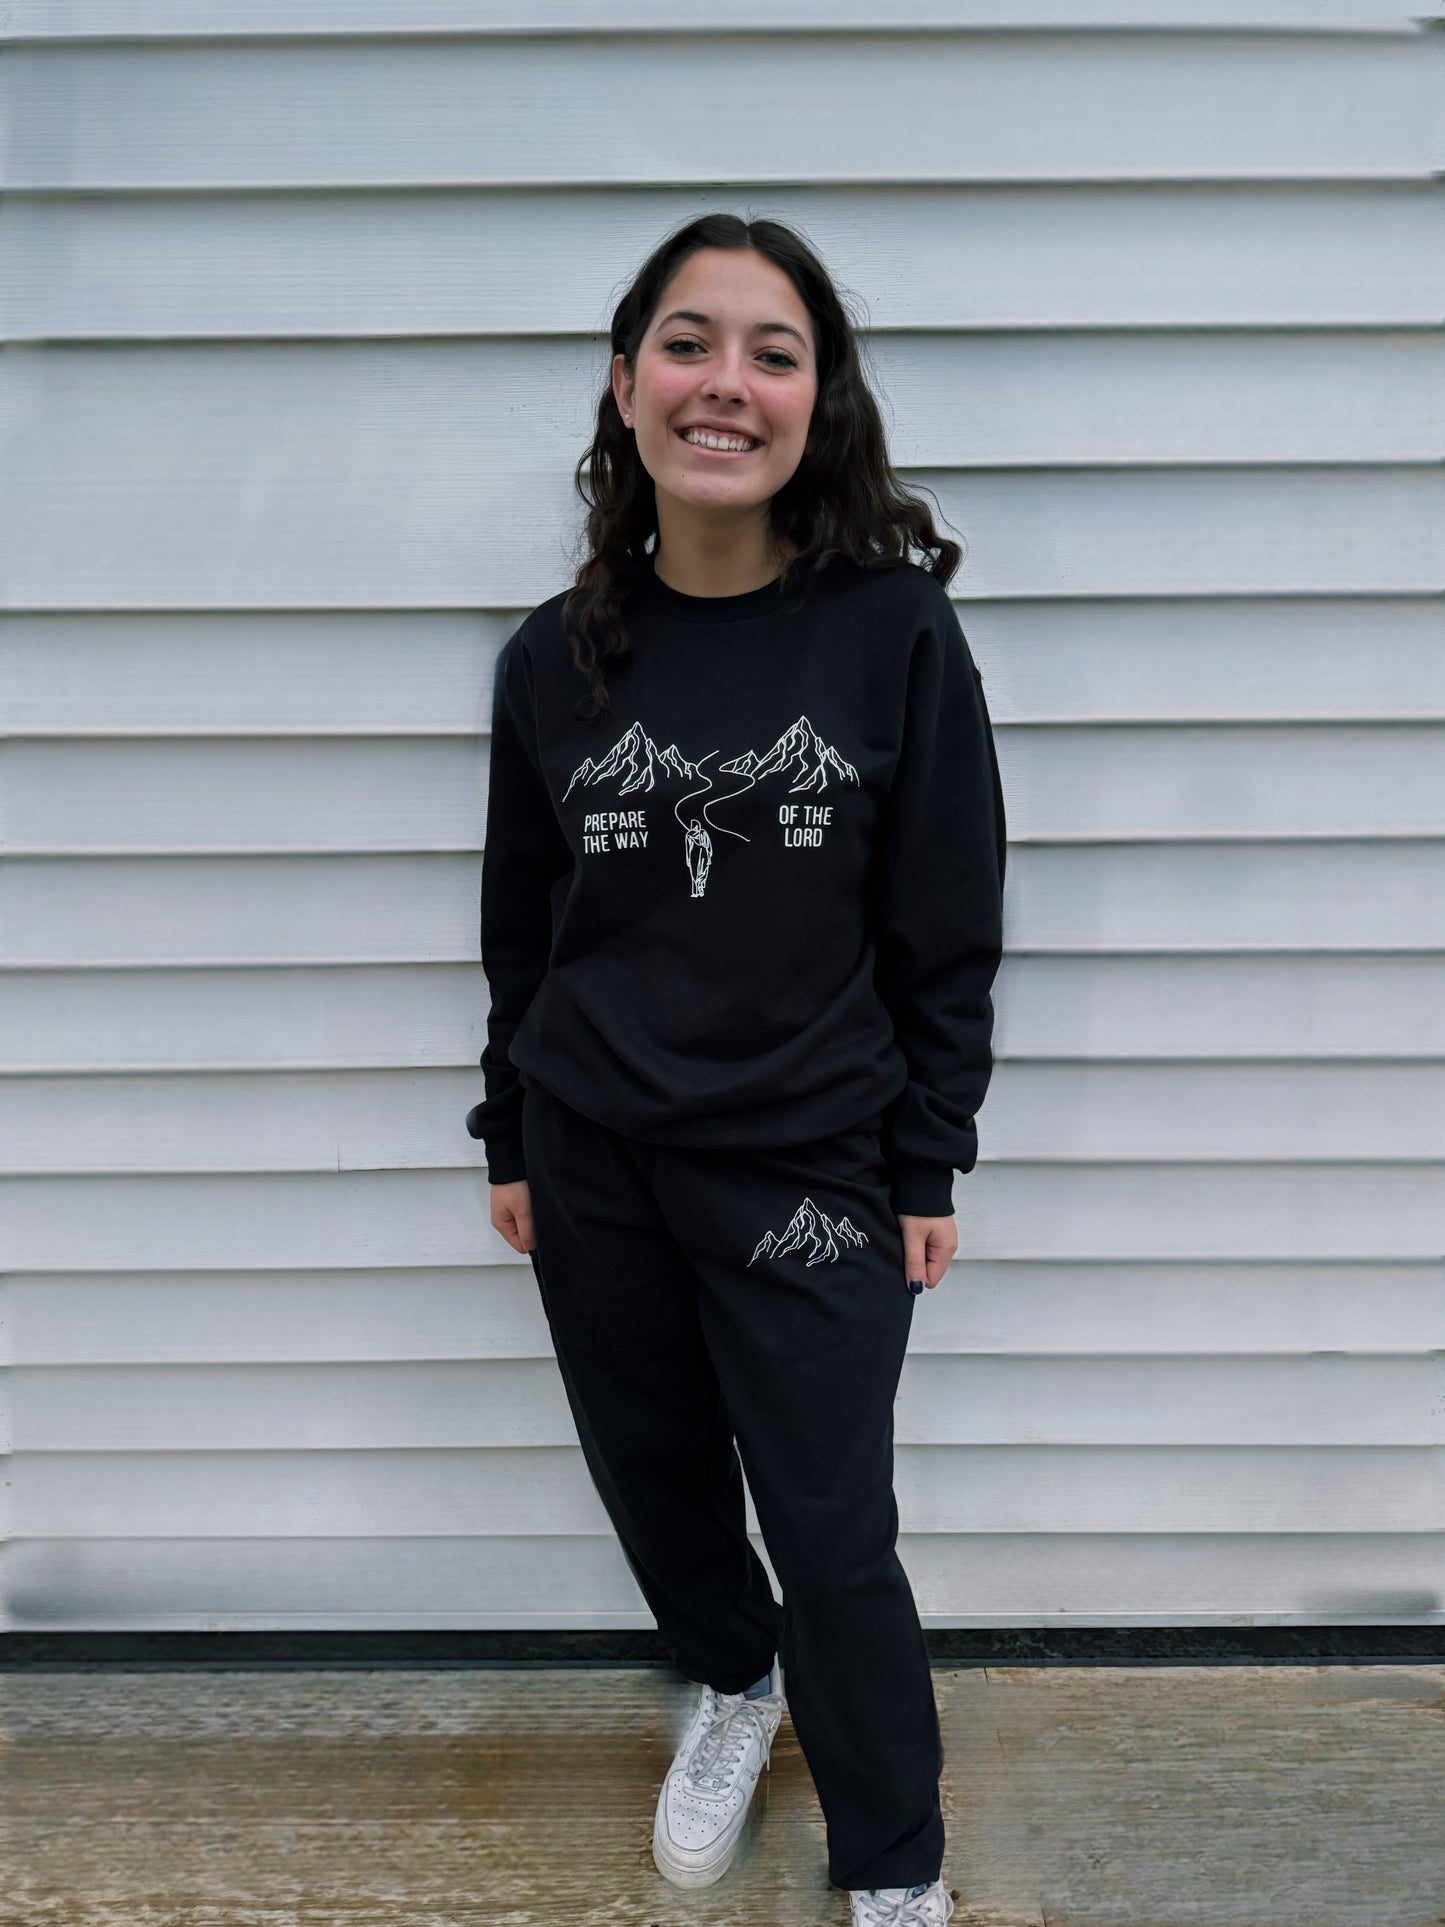 Prepare the way of the Lord Sweatpants – Alabaster Apparel Shop